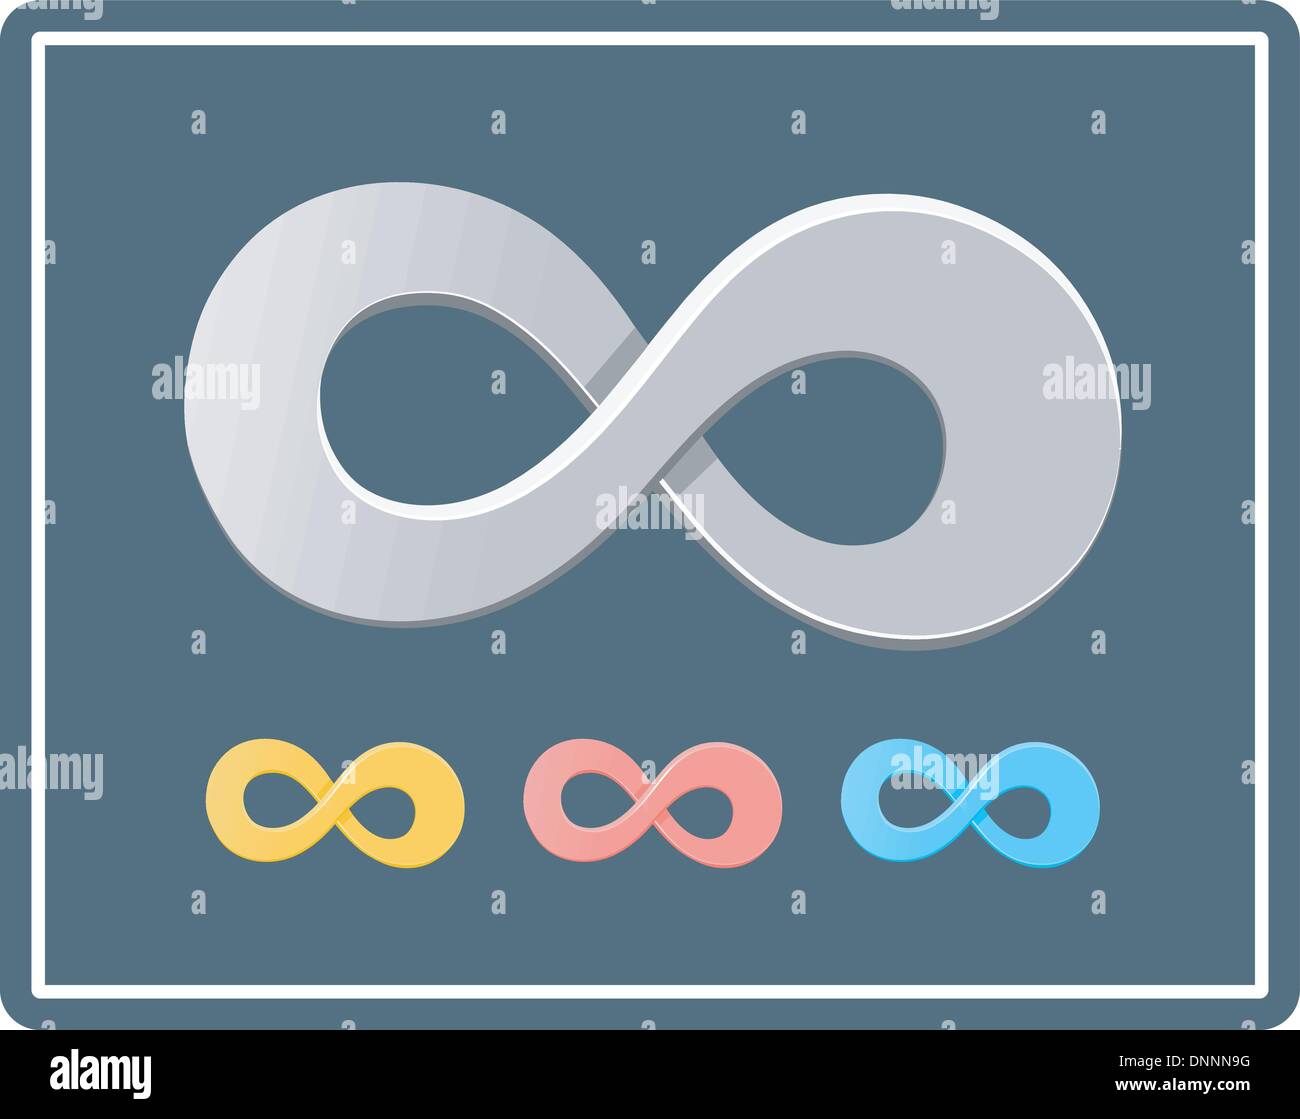 The symbol of infinity. Vector illustration in different color versions ...